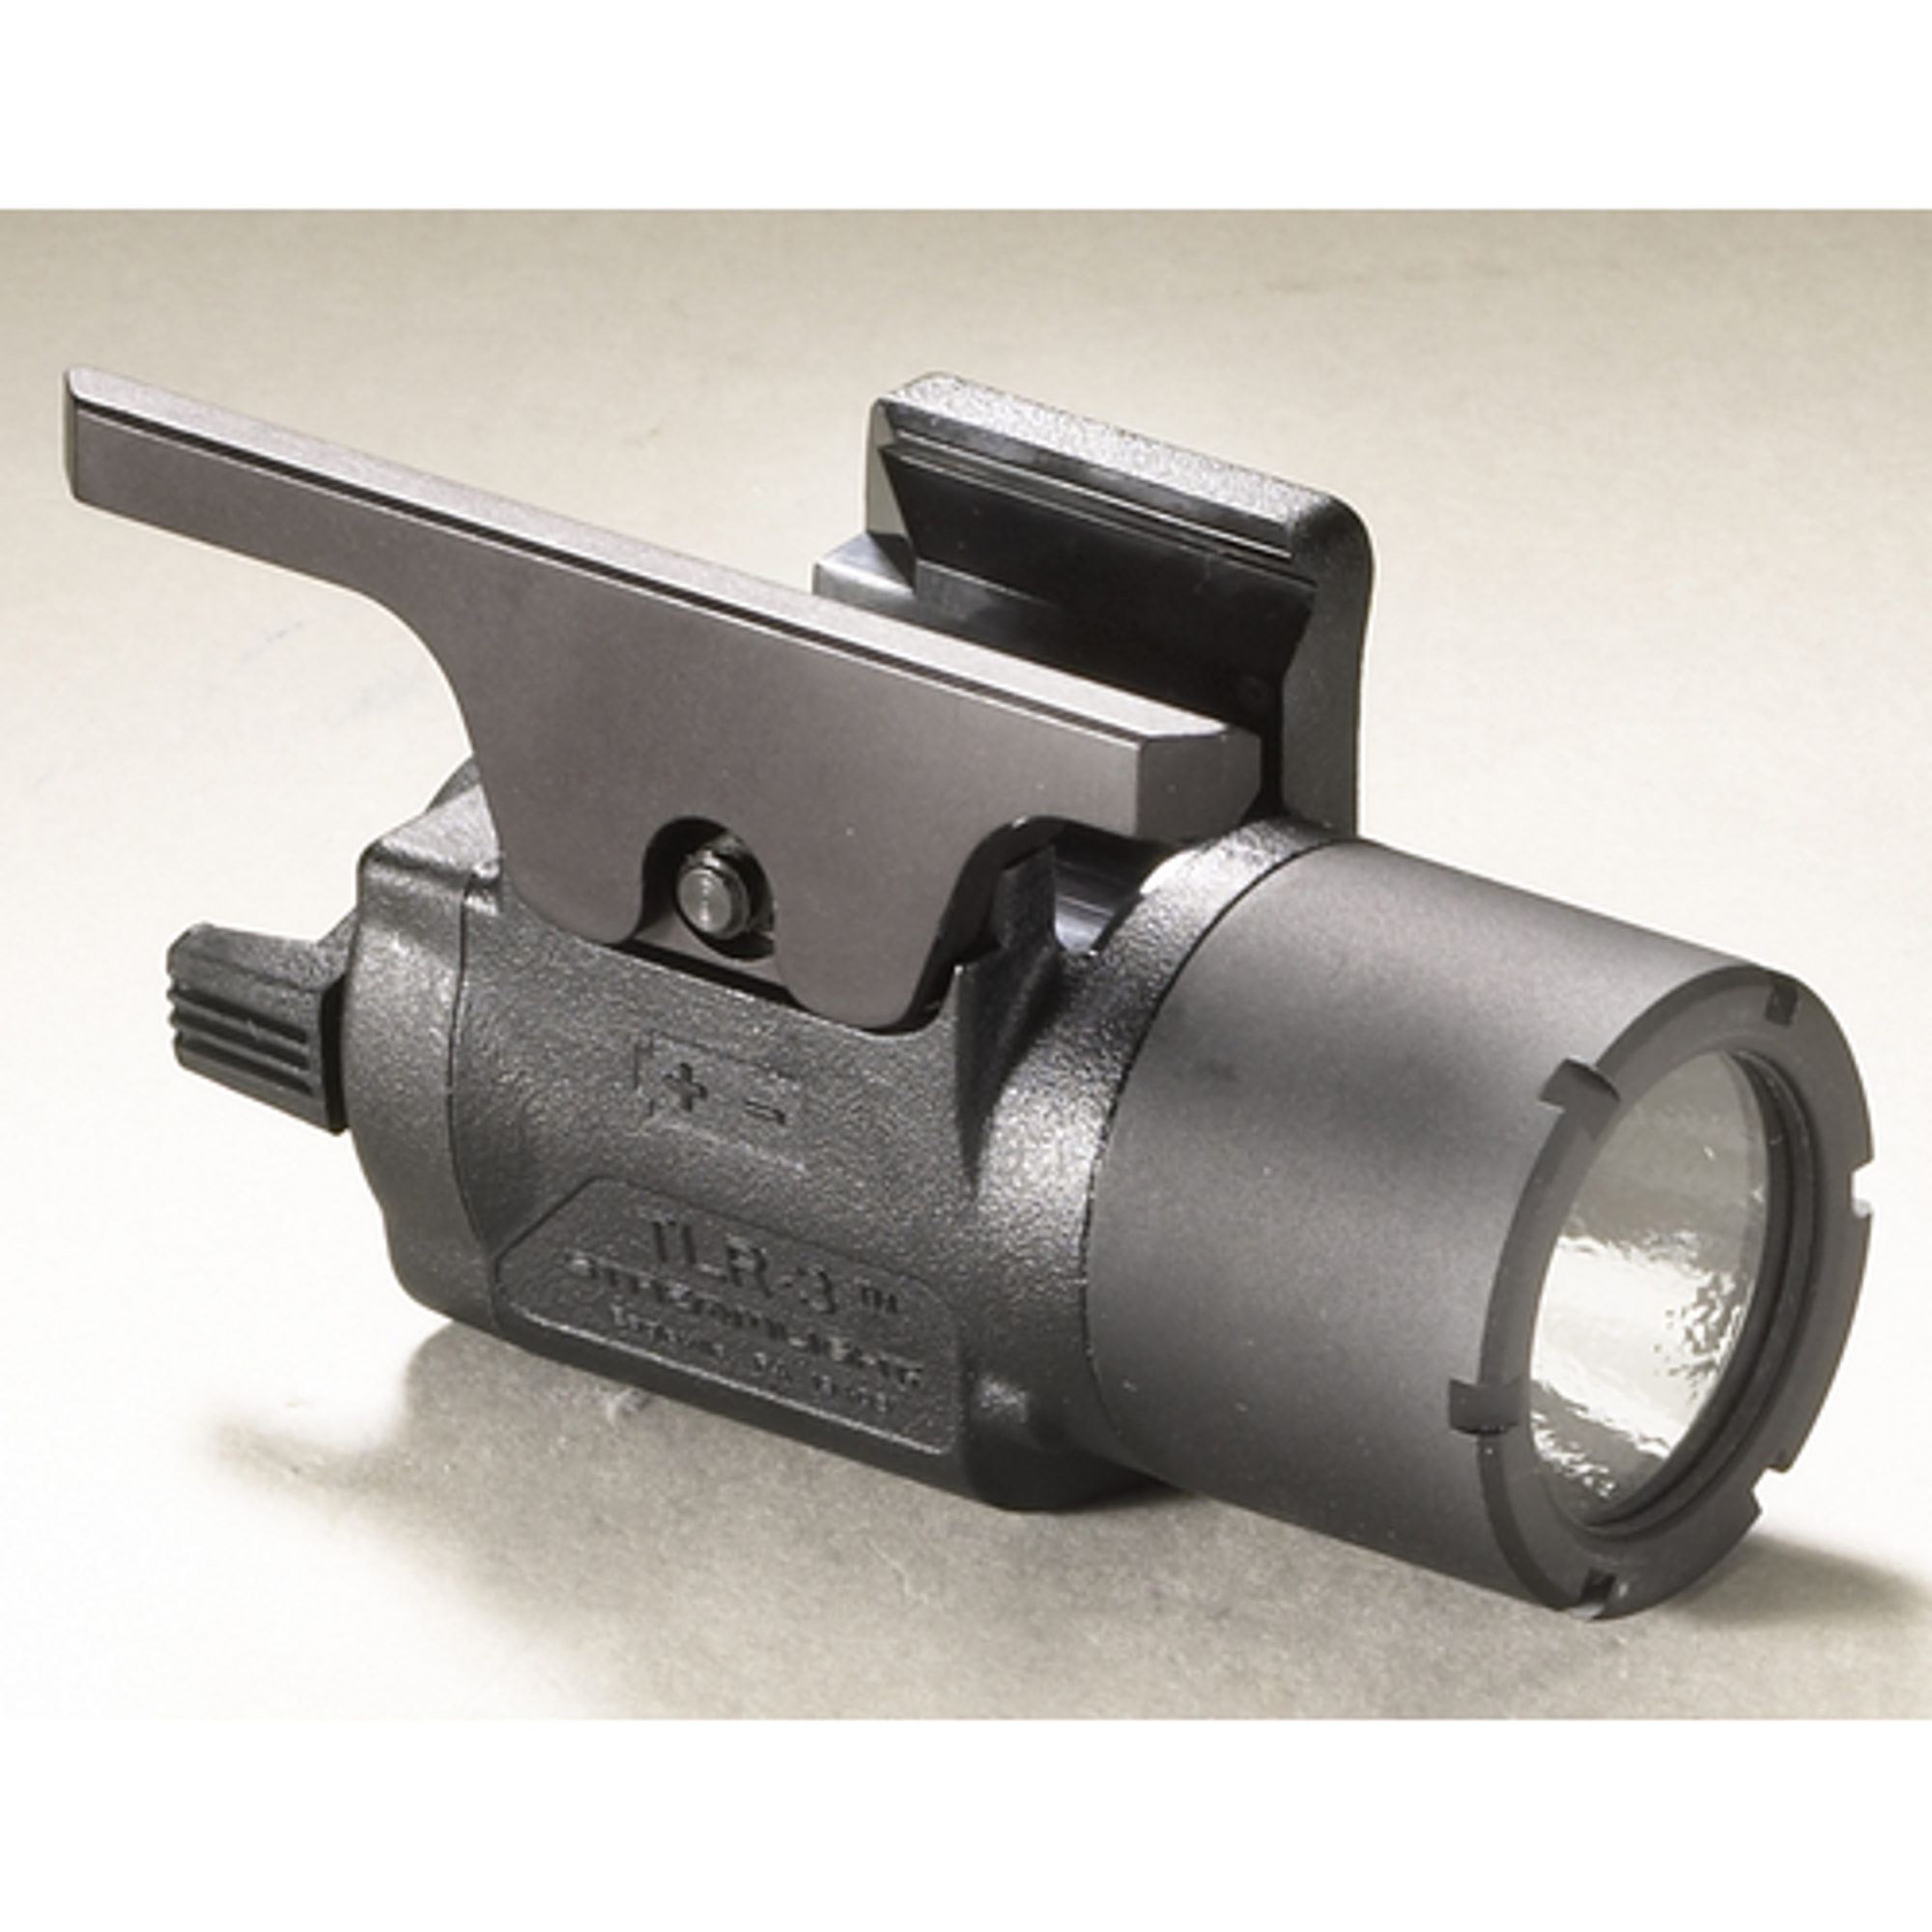 A Tlr-3 Weapons Mounted Light With Rail Locating Keys For A Variety Of Weapons - KR69222